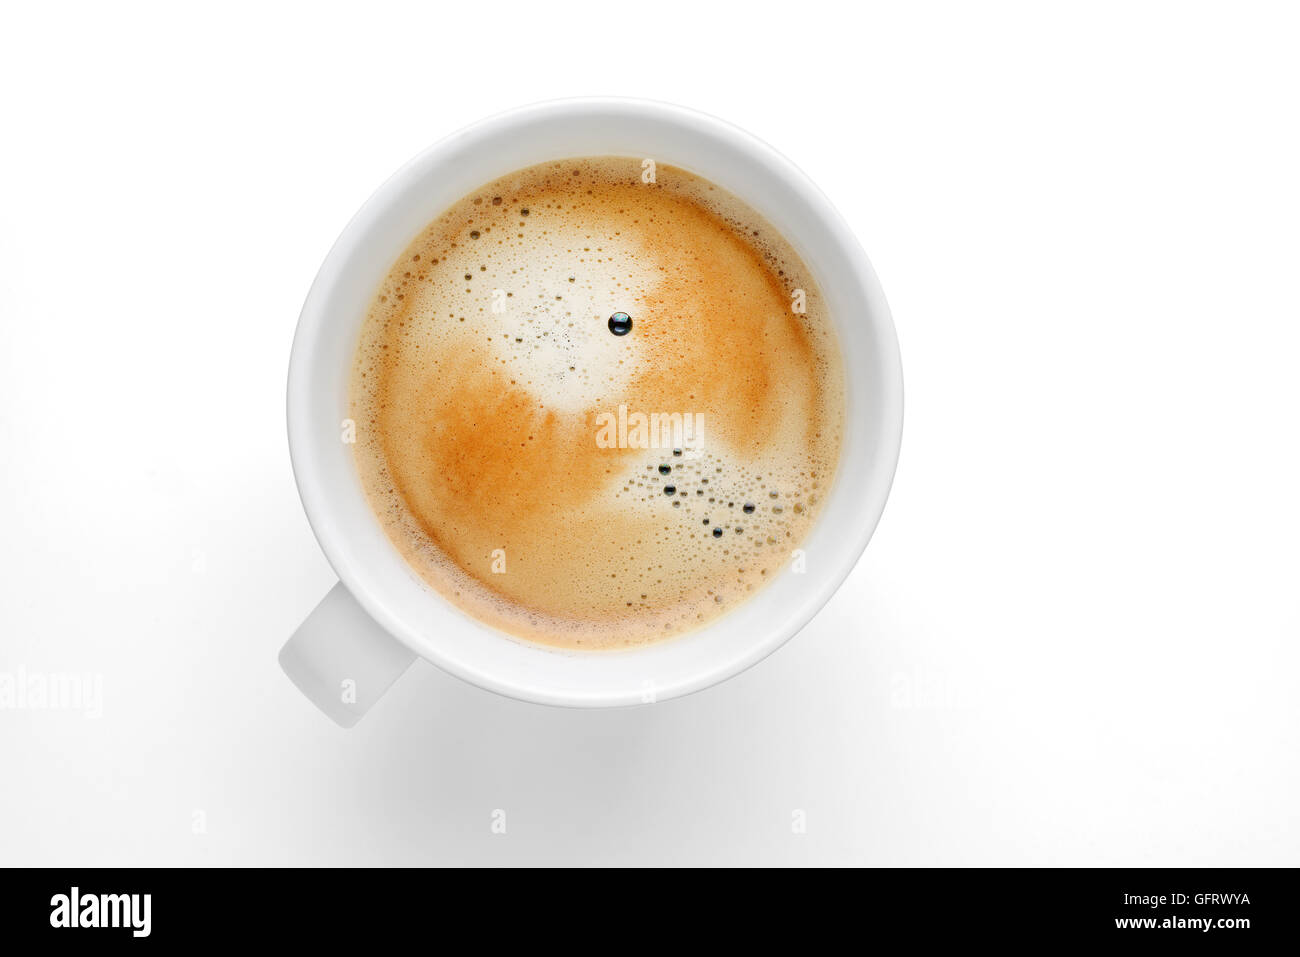 Coffee cup with clipping path Banque D'Images